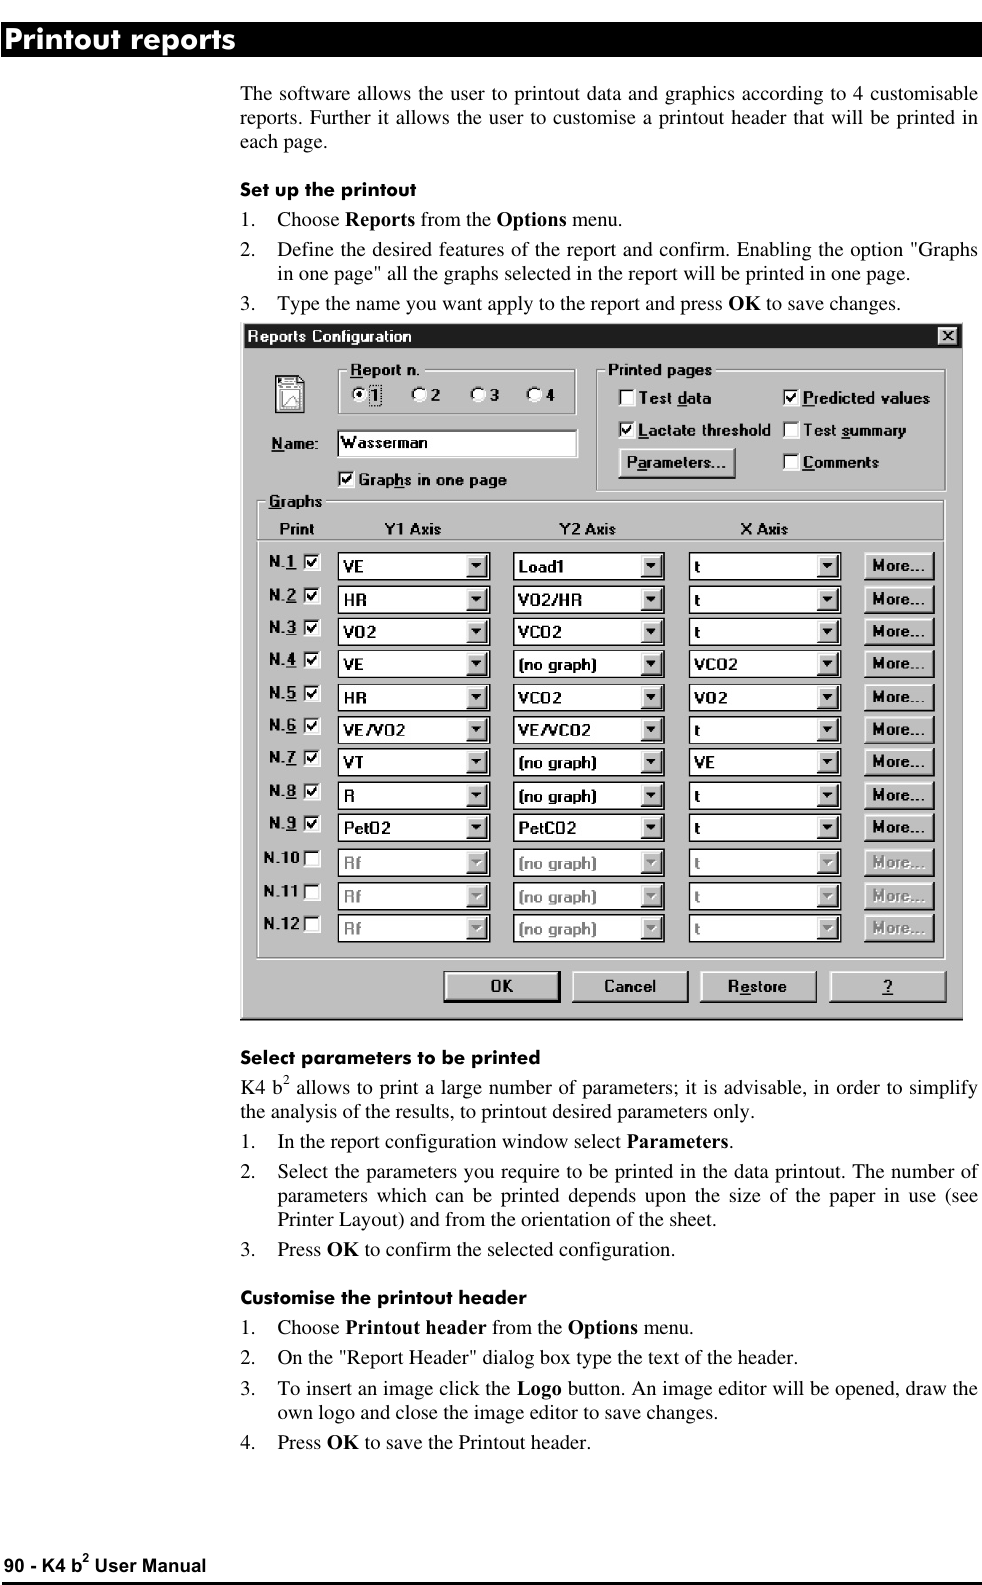  90 - K4 b2 User Manual Printout reports The software allows the user to printout data and graphics according to 4 customisable reports. Further it allows the user to customise a printout header that will be printed in each page. Set up the printout 1.  Choose Reports from the Options menu. 2. Define the desired features of the report and confirm. Enabling the option &quot;Graphs in one page&quot; all the graphs selected in the report will be printed in one page. 3. Type the name you want apply to the report and press OK to save changes.  Select parameters to be printed K4 b2 allows to print a large number of parameters; it is advisable, in order to simplify the analysis of the results, to printout desired parameters only. 1. In the report configuration window select Parameters. 2. Select the parameters you require to be printed in the data printout. The number of parameters which can be printed depends upon the size of the paper in use (see Printer Layout) and from the orientation of the sheet. 3. Press OK to confirm the selected configuration. Customise the printout header 1.  Choose Printout header from the Options menu. 2. On the &quot;Report Header&quot; dialog box type the text of the header. 3. To insert an image click the Logo button. An image editor will be opened, draw the own logo and close the image editor to save changes. 4. Press OK to save the Printout header. 